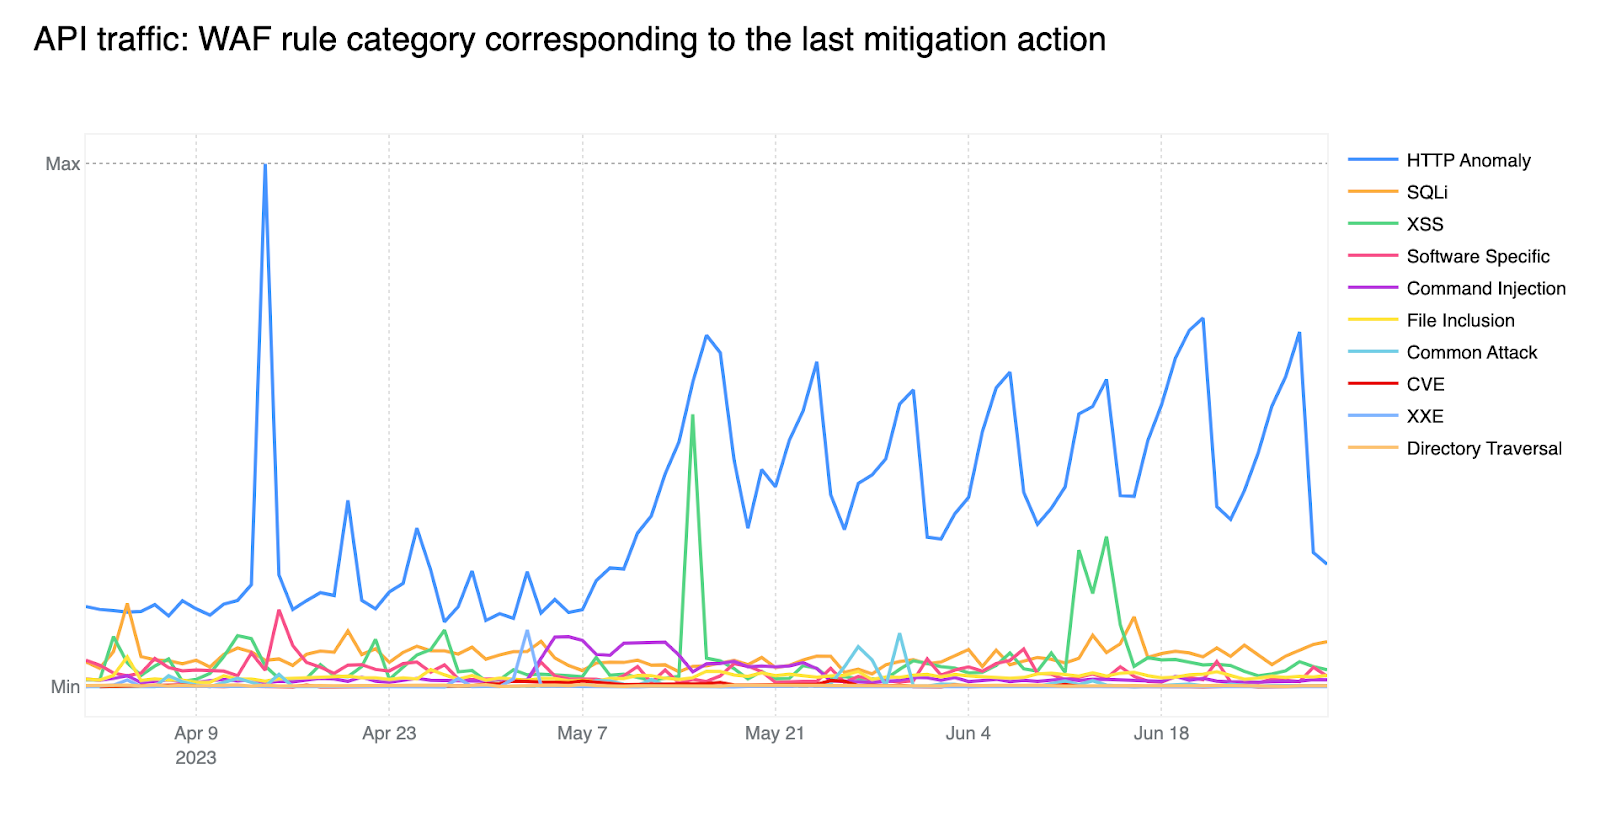 WAF rule category corresponding to the last mitigation action on API traffic over the last quarter